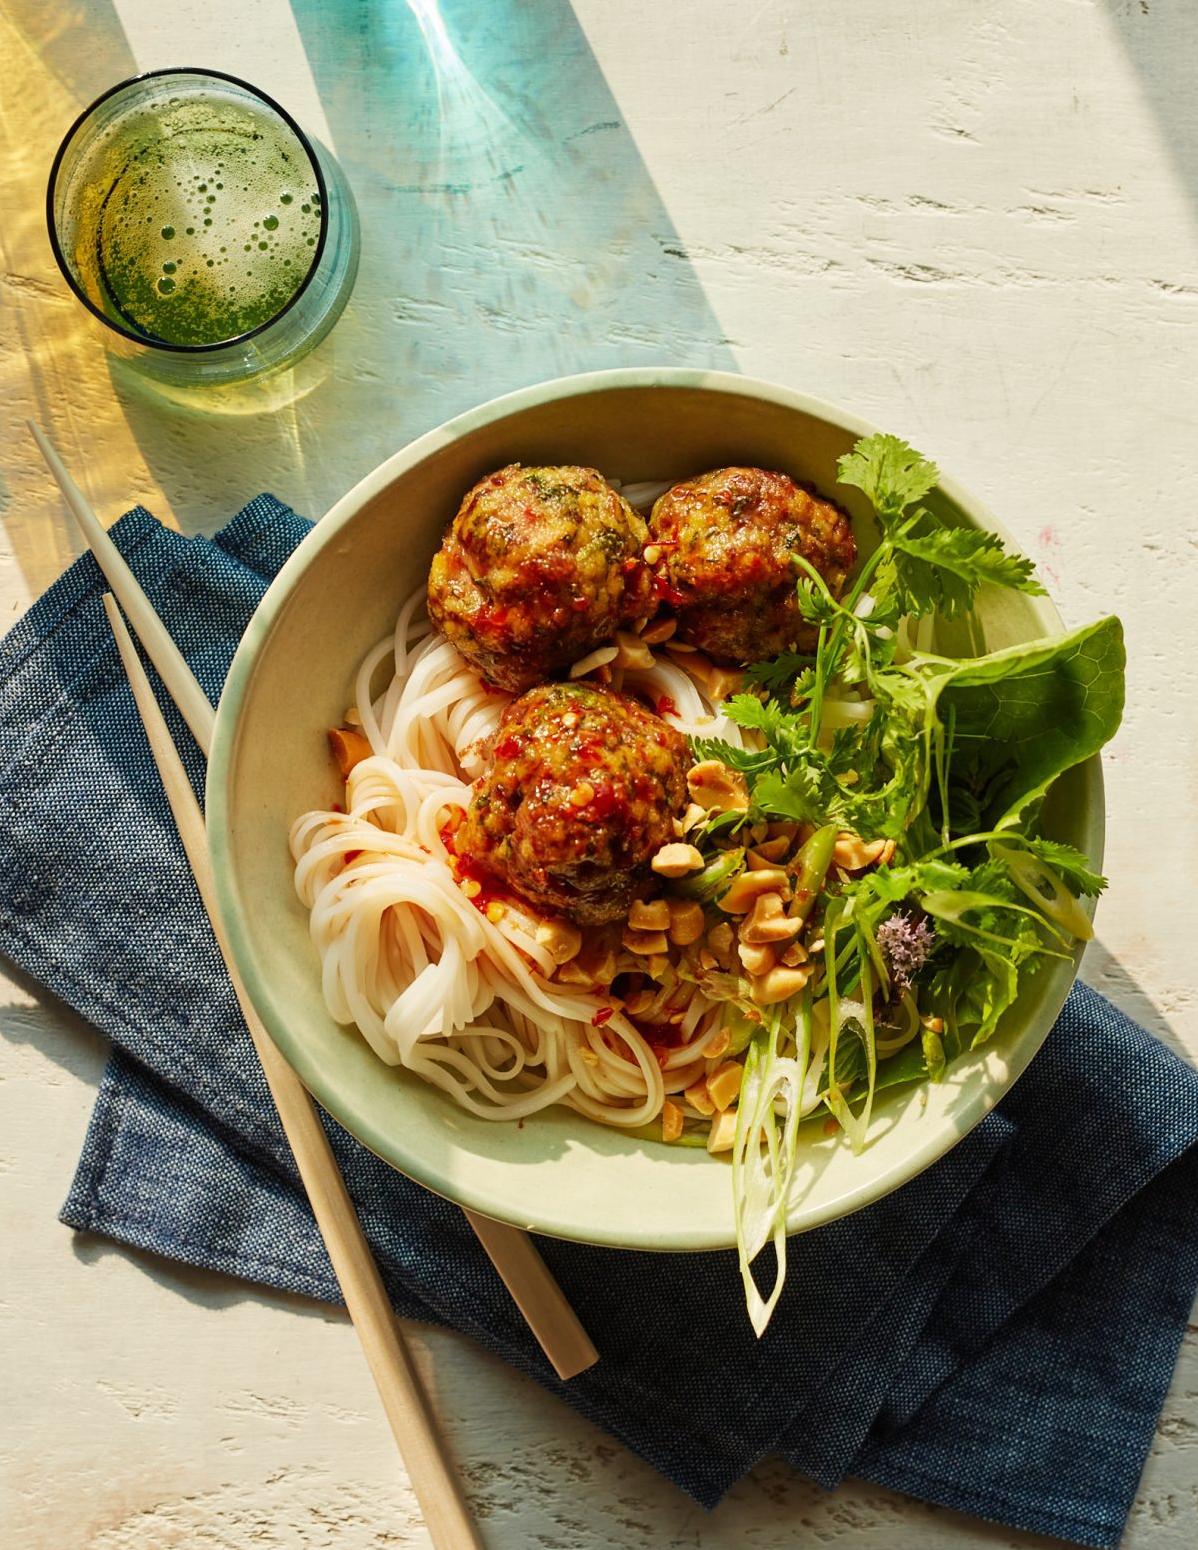  These flavorful meatballs are perfect for meal prep or a quick weeknight dinner.